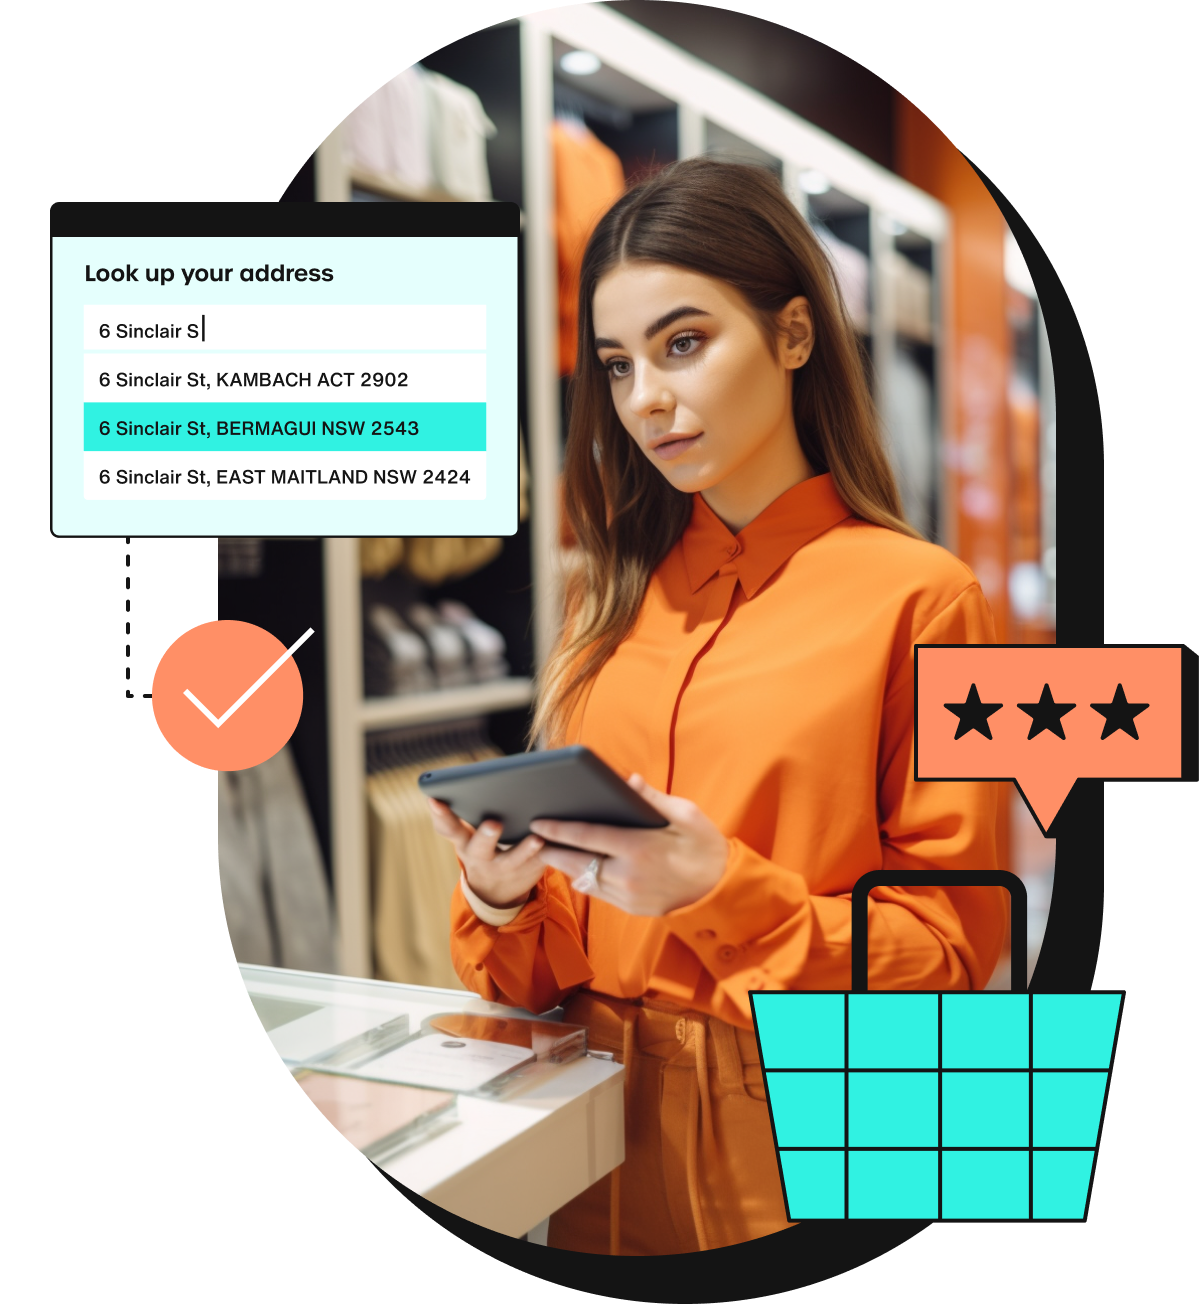 Retail and Ecommerce businesses in Australia and New Zealand trust Loqate.